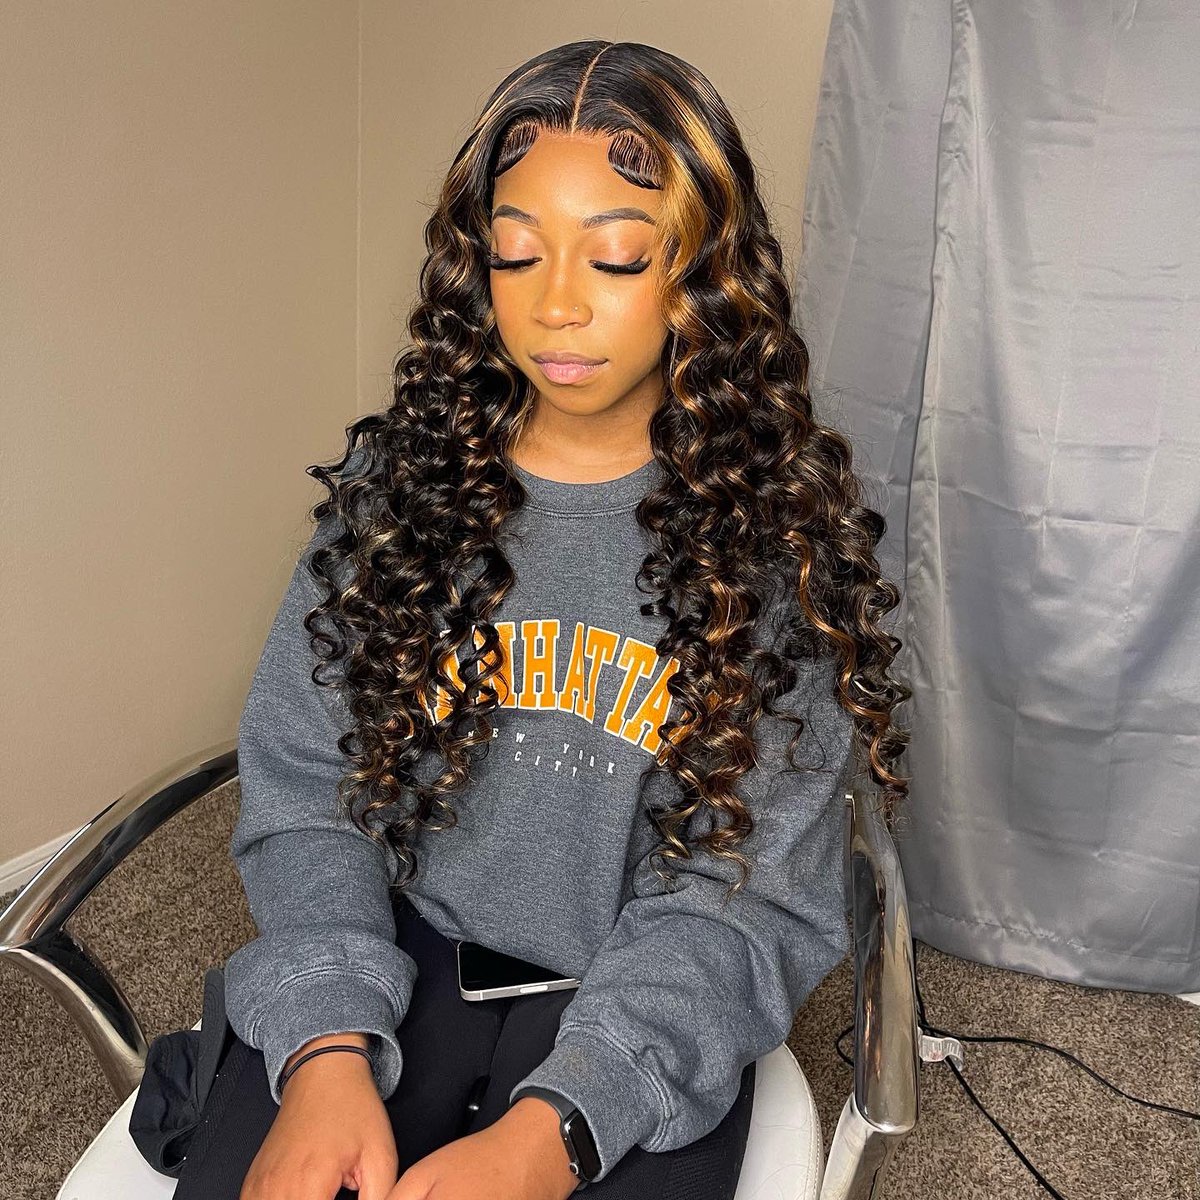 frontal wig install + custom color + wand curls for the win 😍

#hairbyzeesimonee 
#texashairstylists #atxhairstylist #houstonhairstylist #frontalsewin #closuresewin #sanantoniohairstylist #frontalwig #wiginstall #explore